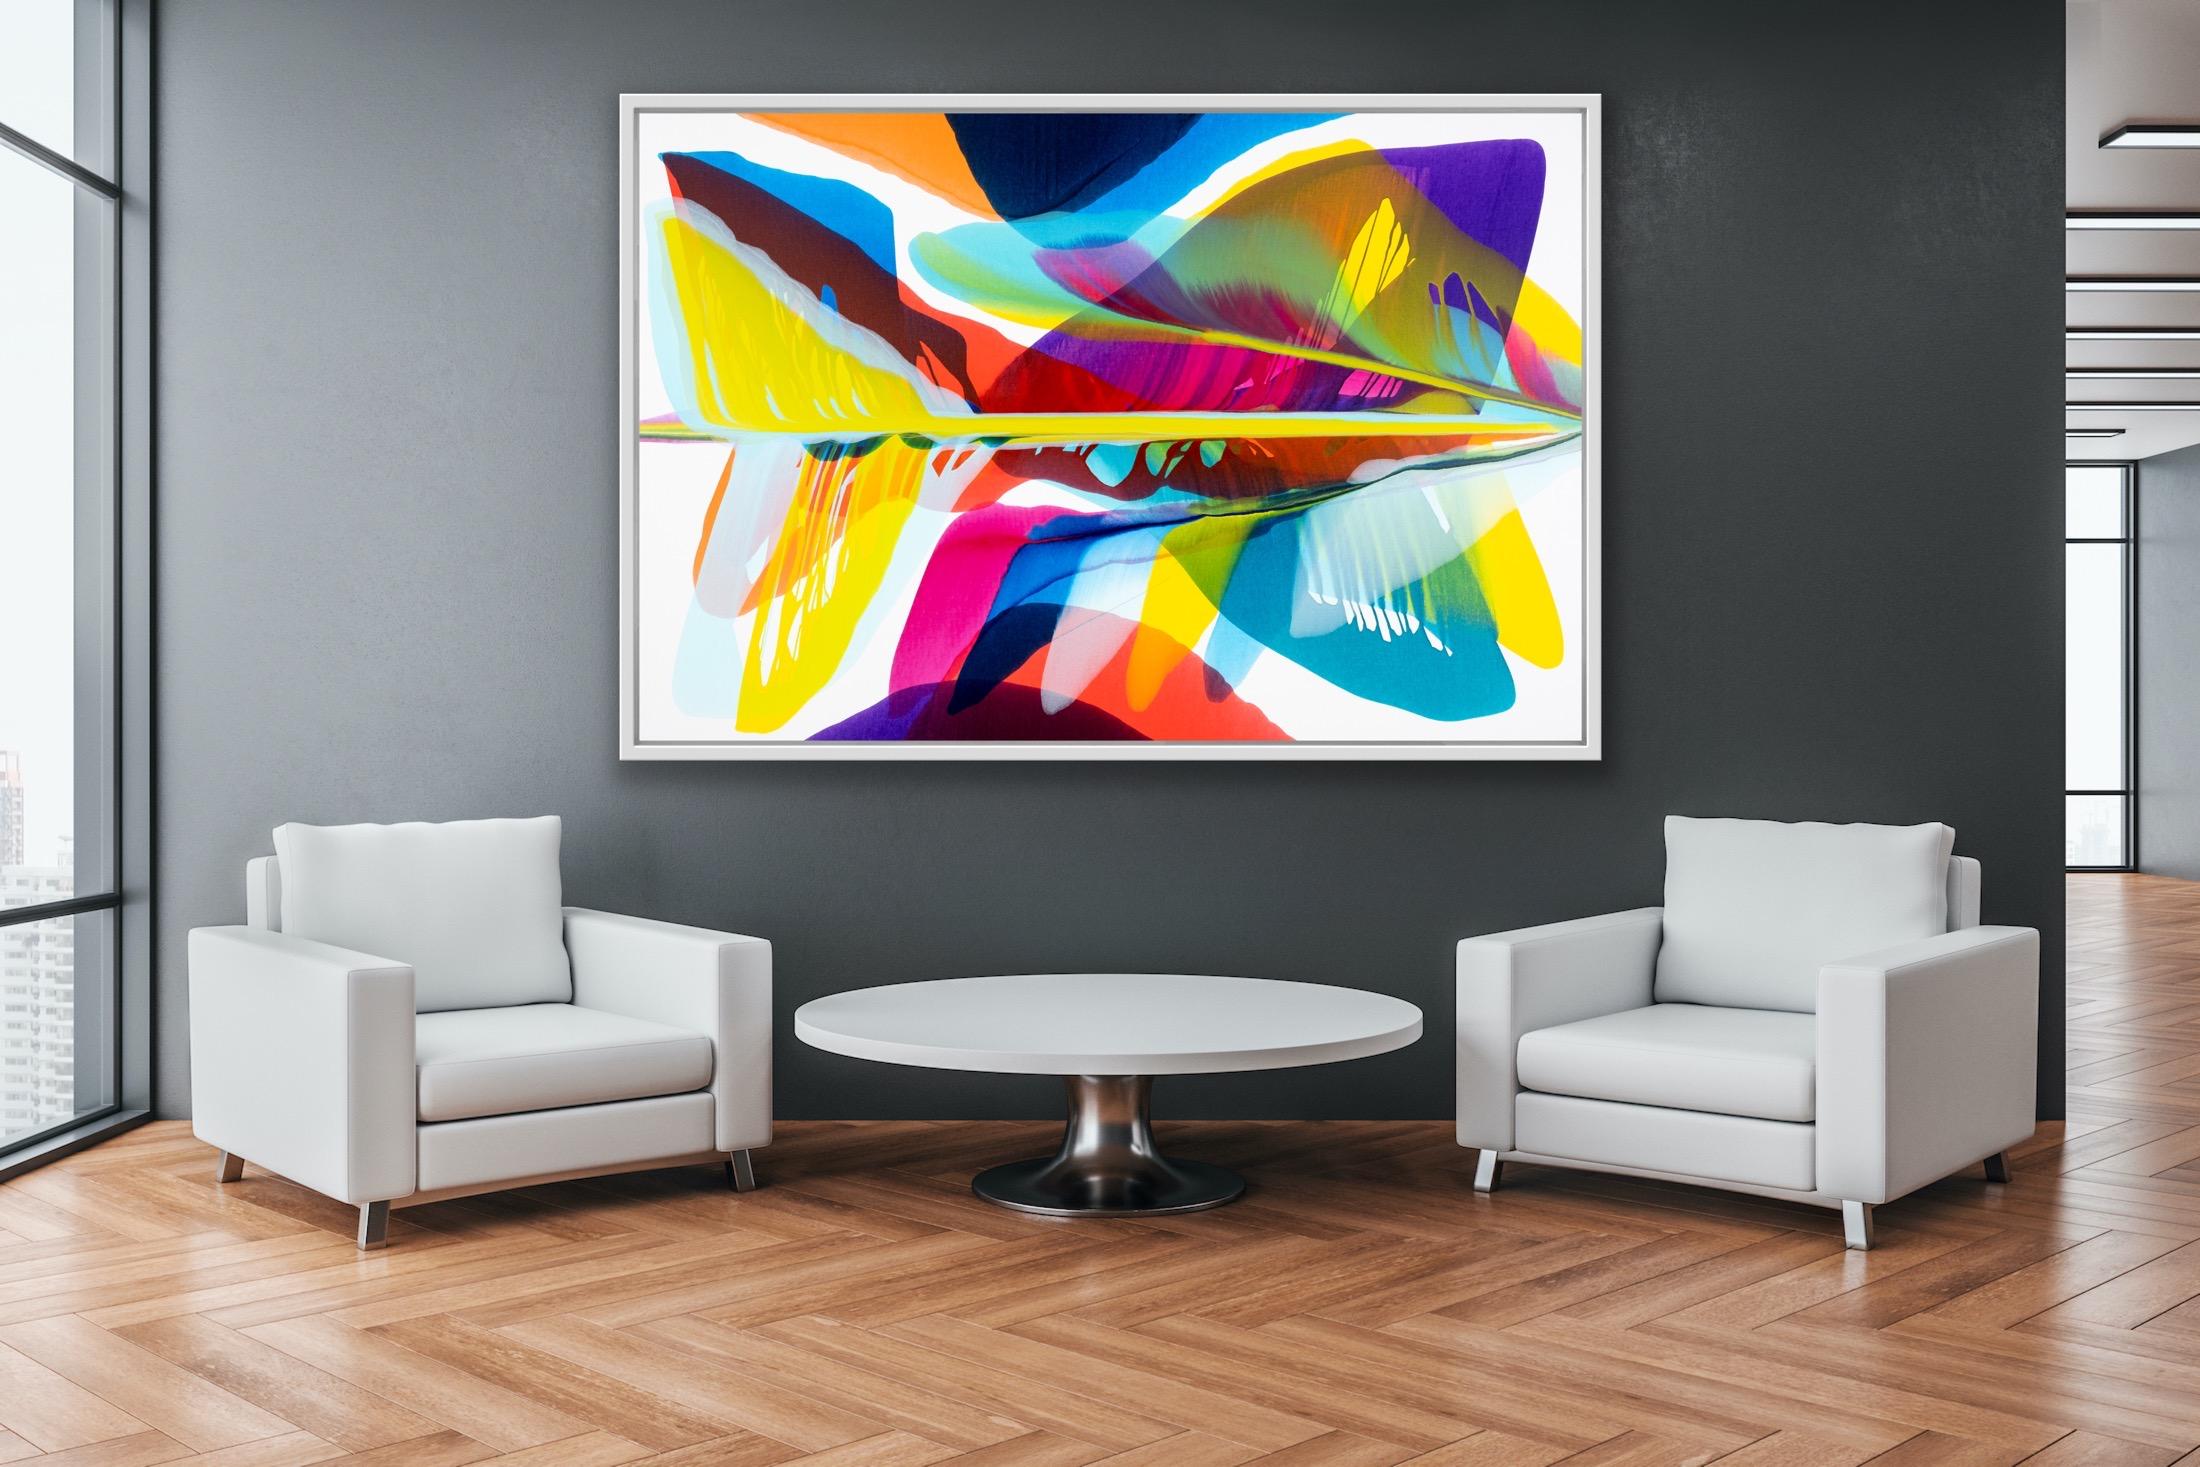 Manifestation of A Dream, Large colorful poured abstract on canvas, 2022 - Painting by Brooke Palmer